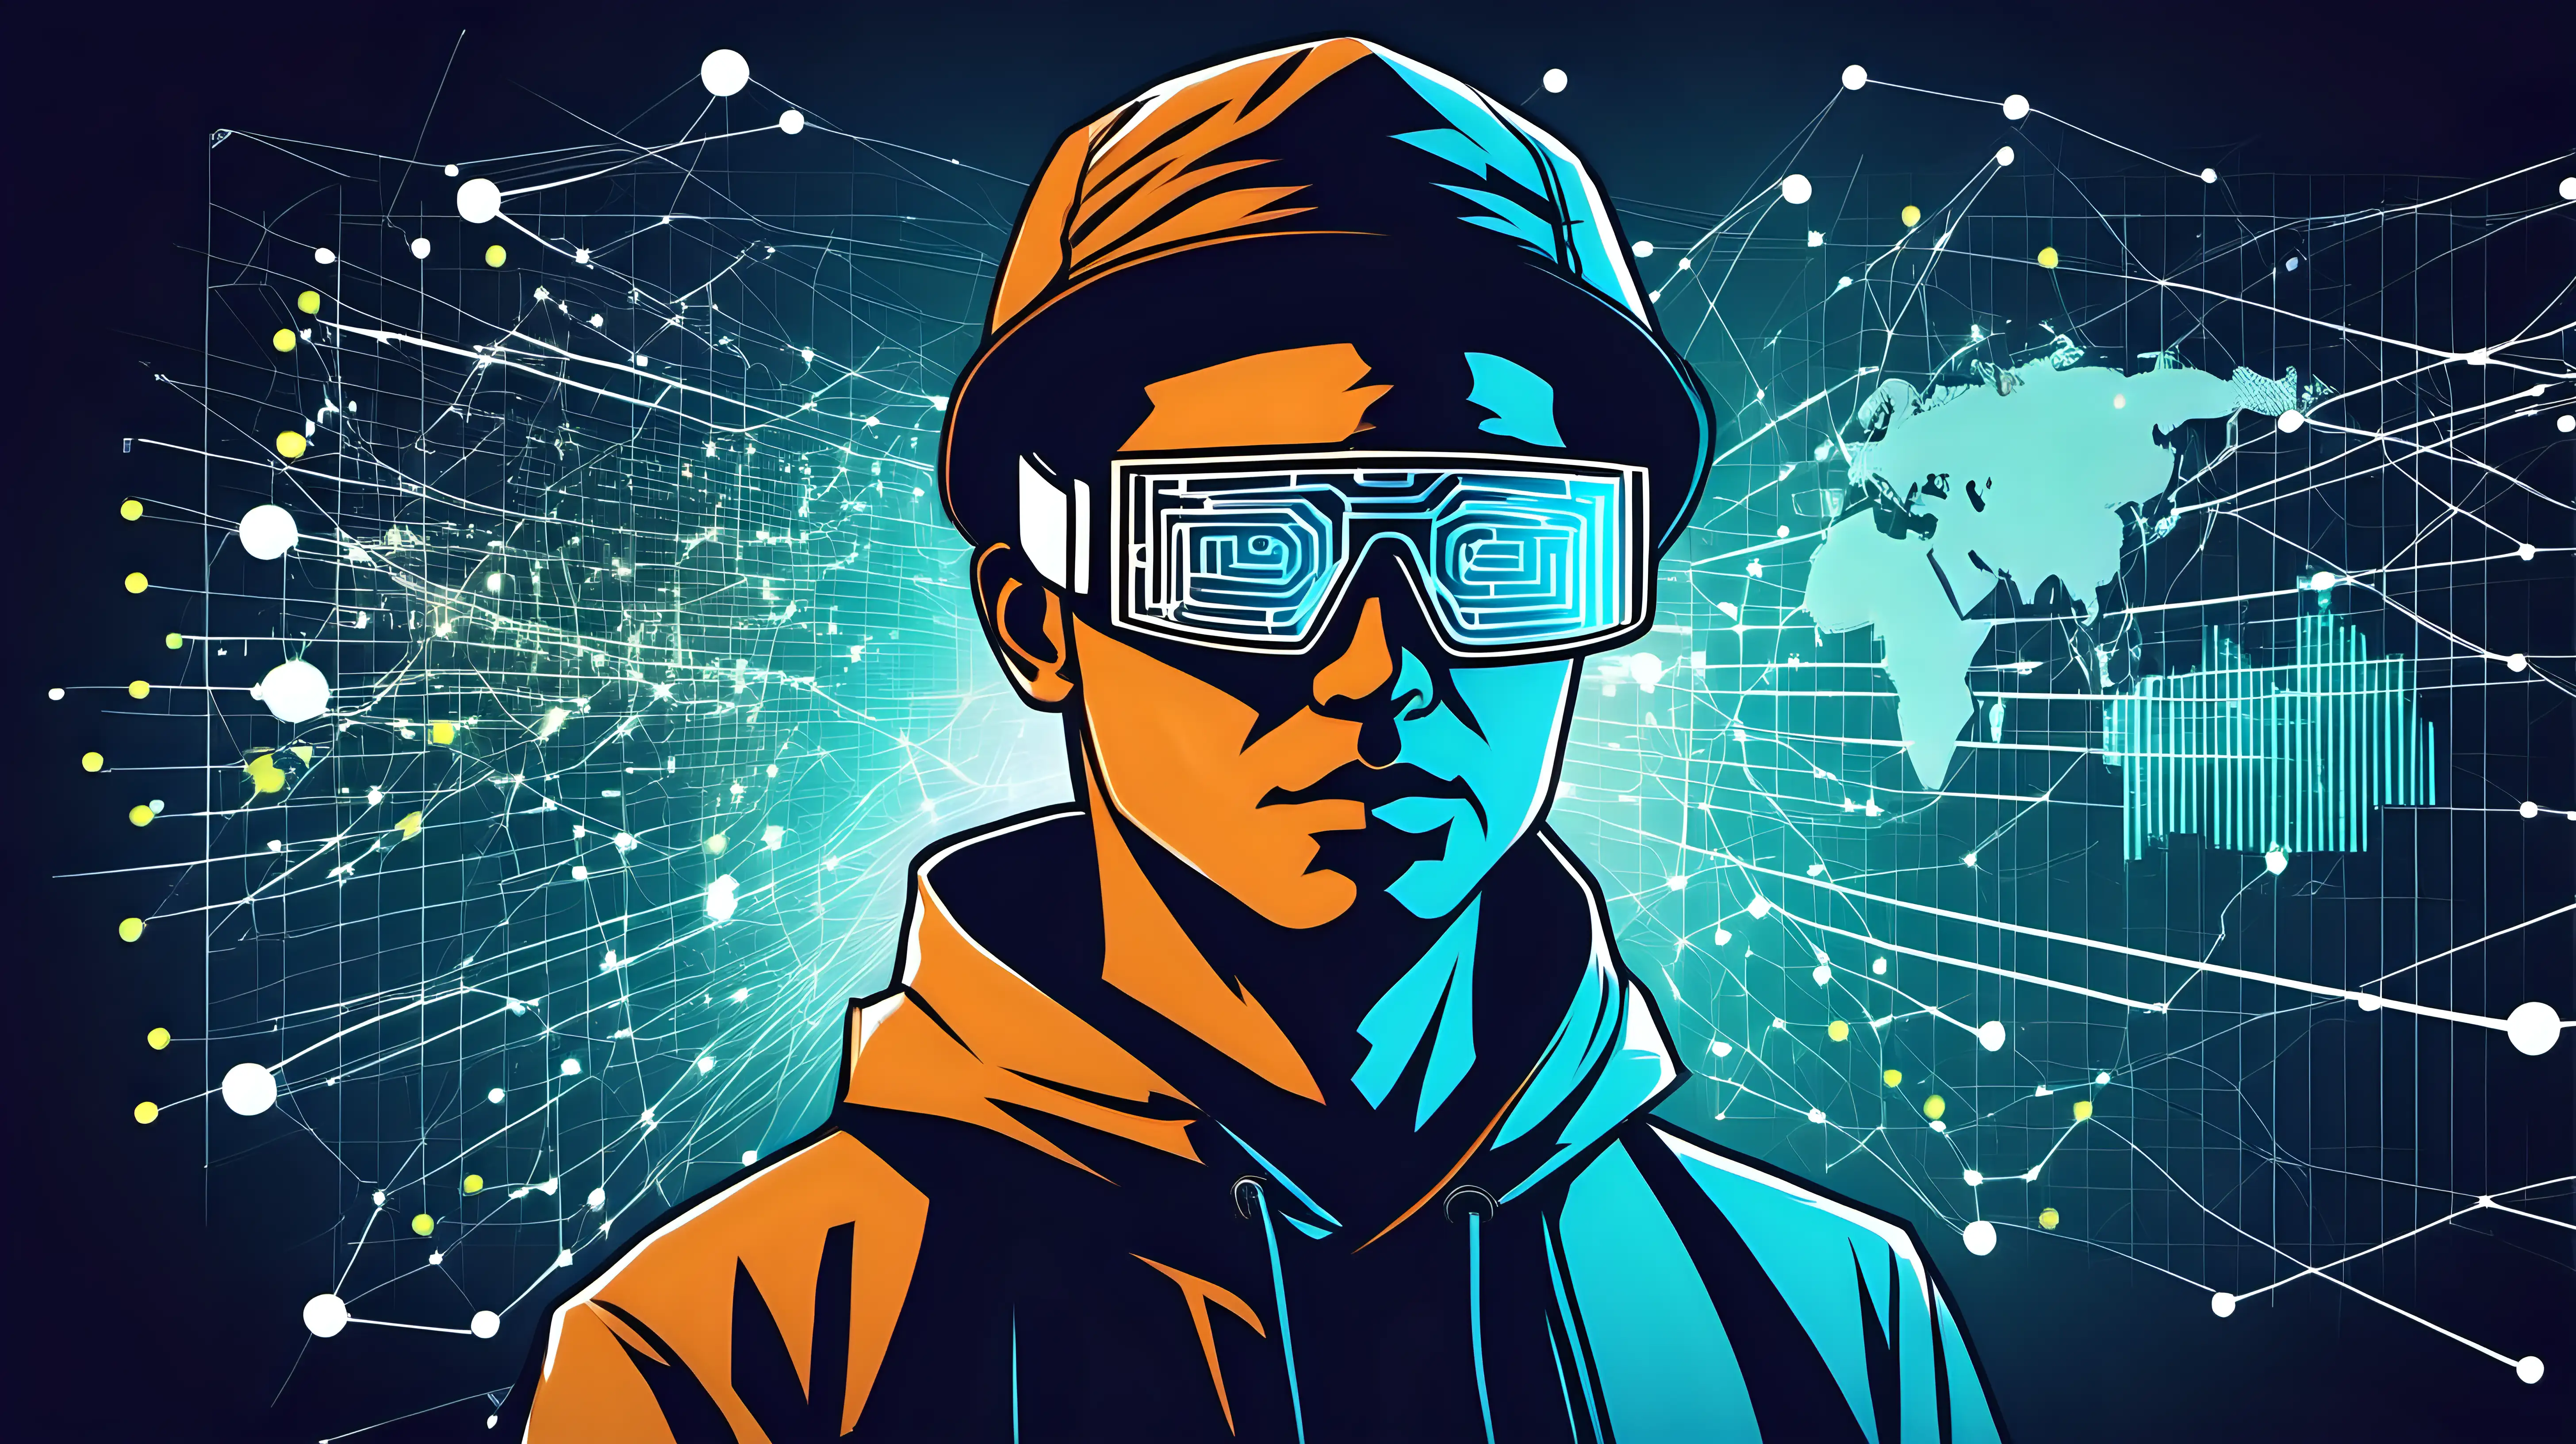 A stylized illustration of a hacker wearing augmented reality glasses, visualizing data streams and digital information overlays.